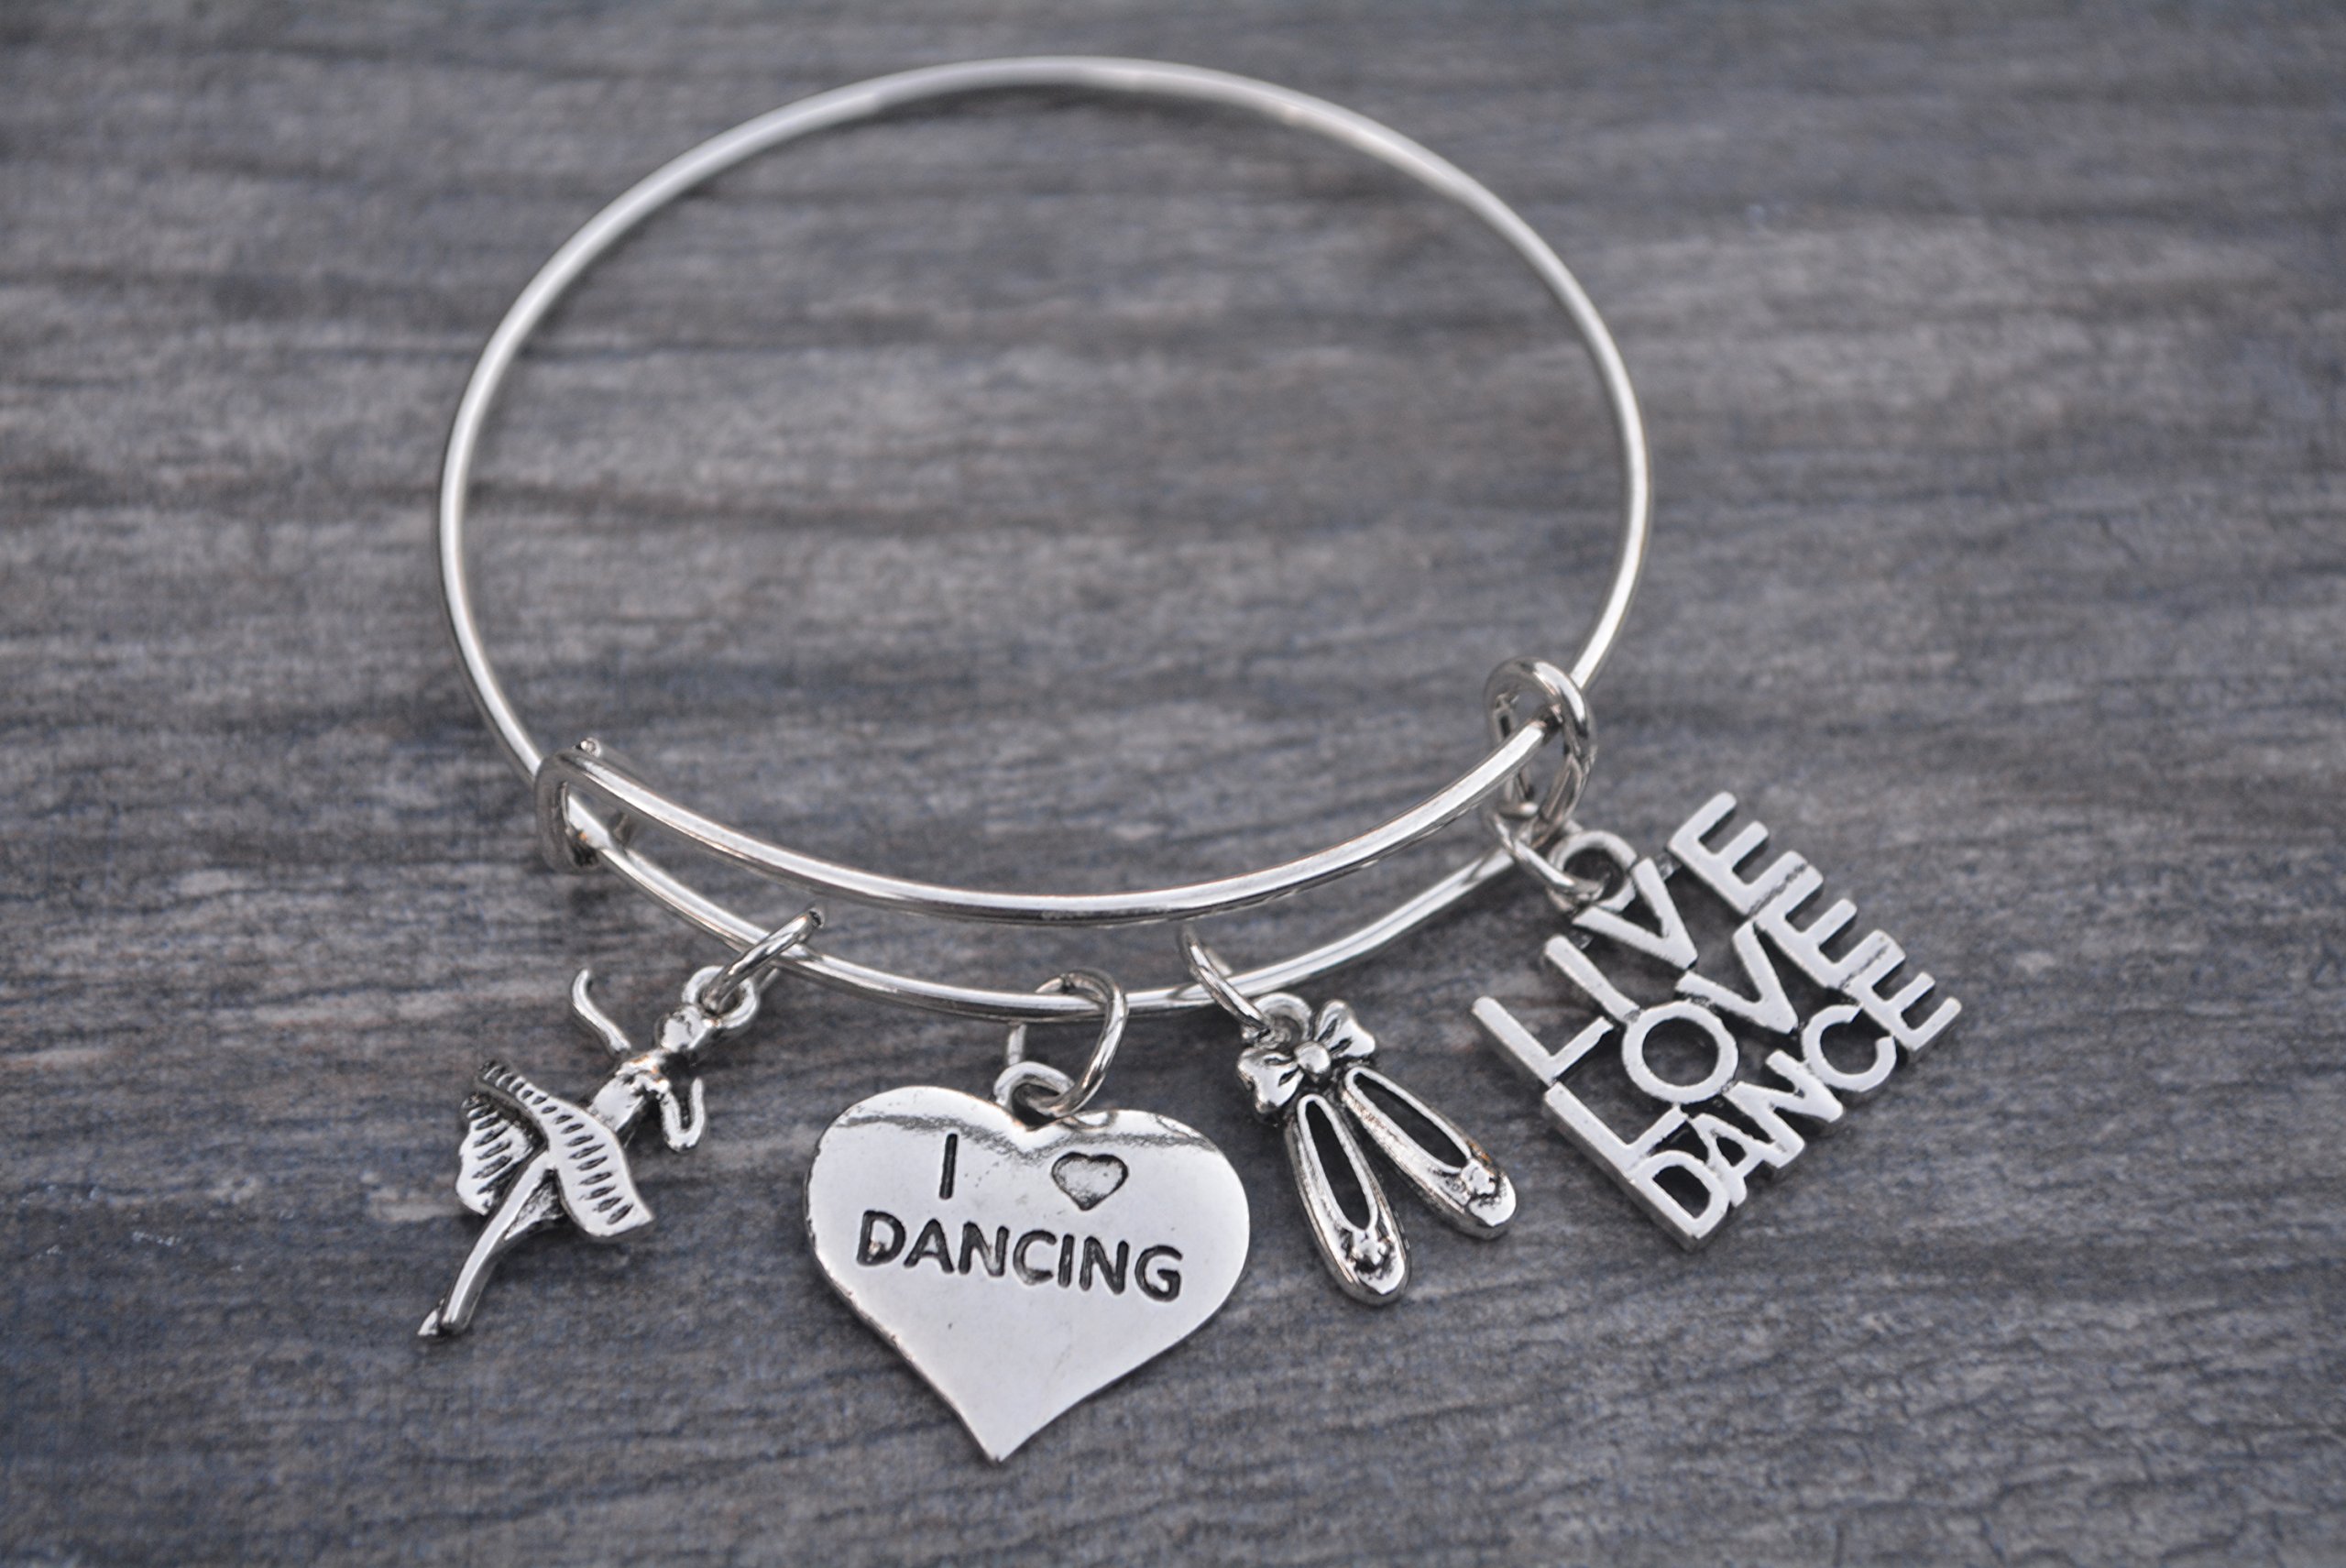 Infinity Collection Dance Bangle Bracelet- Dance Jewelry -Gift For Dance Recitals, Dancers and Dance Teams